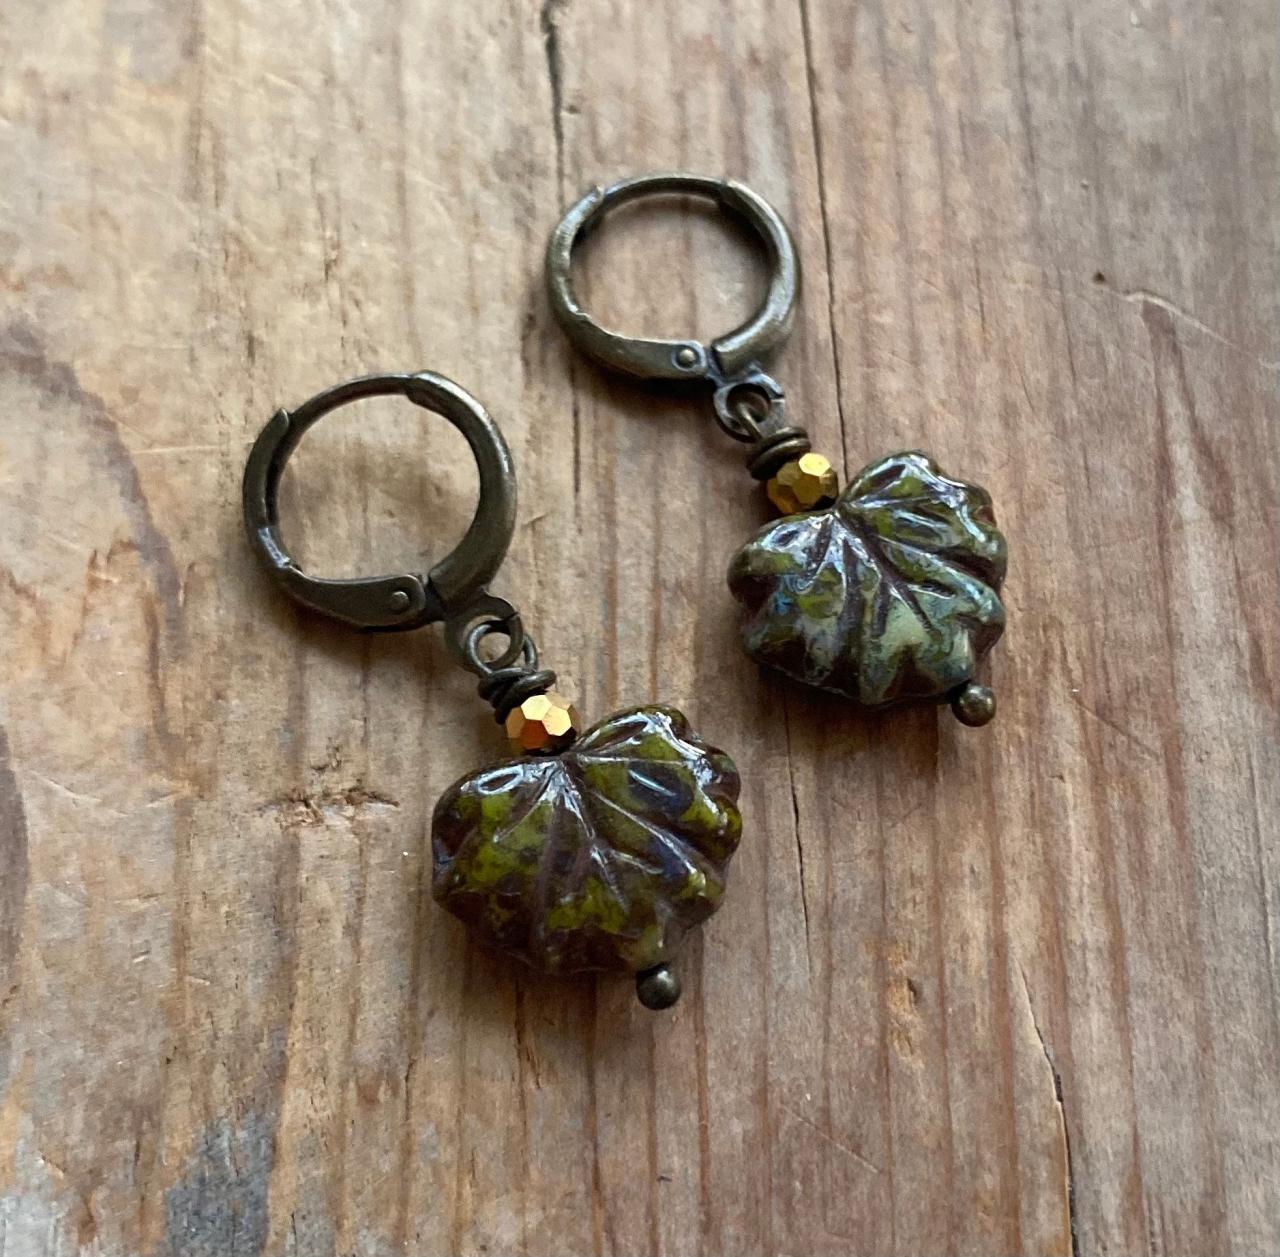 Maple Leaf Earrings Olive Green Silver Fall Fashion Jewelry Nature Inspired Vintage Style Leaf Jewelry Gifts Under 30 Rustic Woodland.